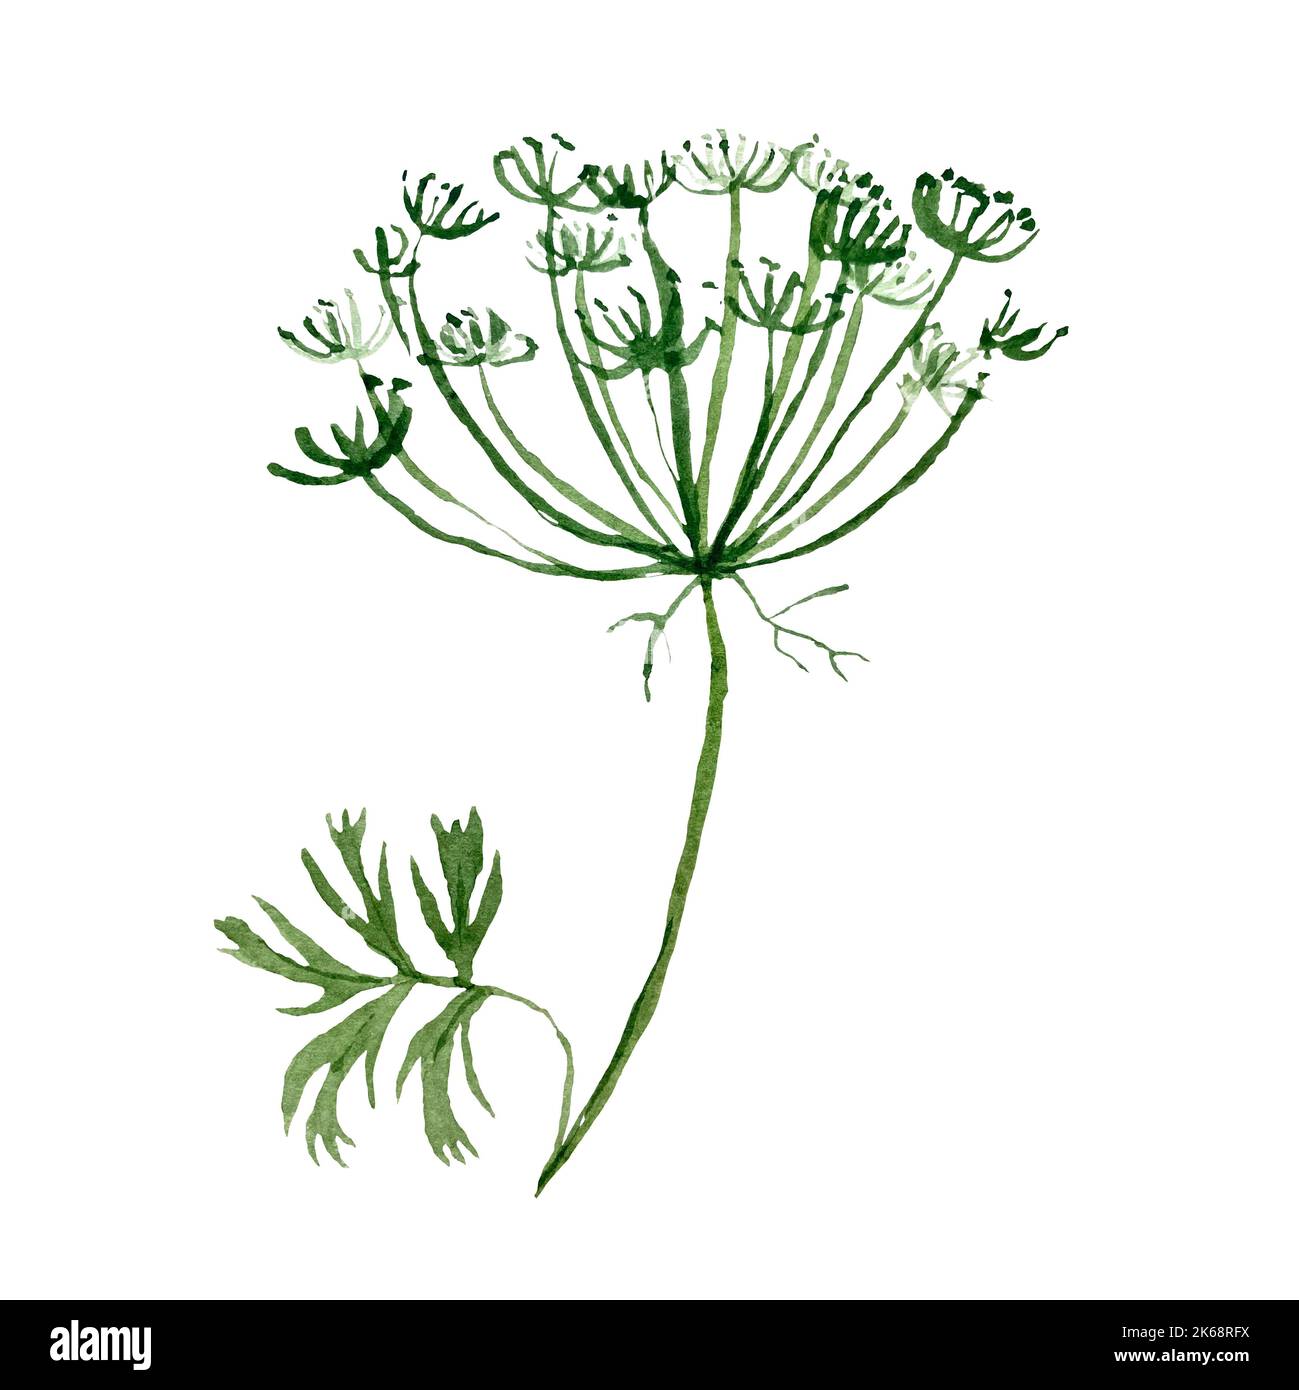 A green cute flower simple watercolor illustration Stock Photo